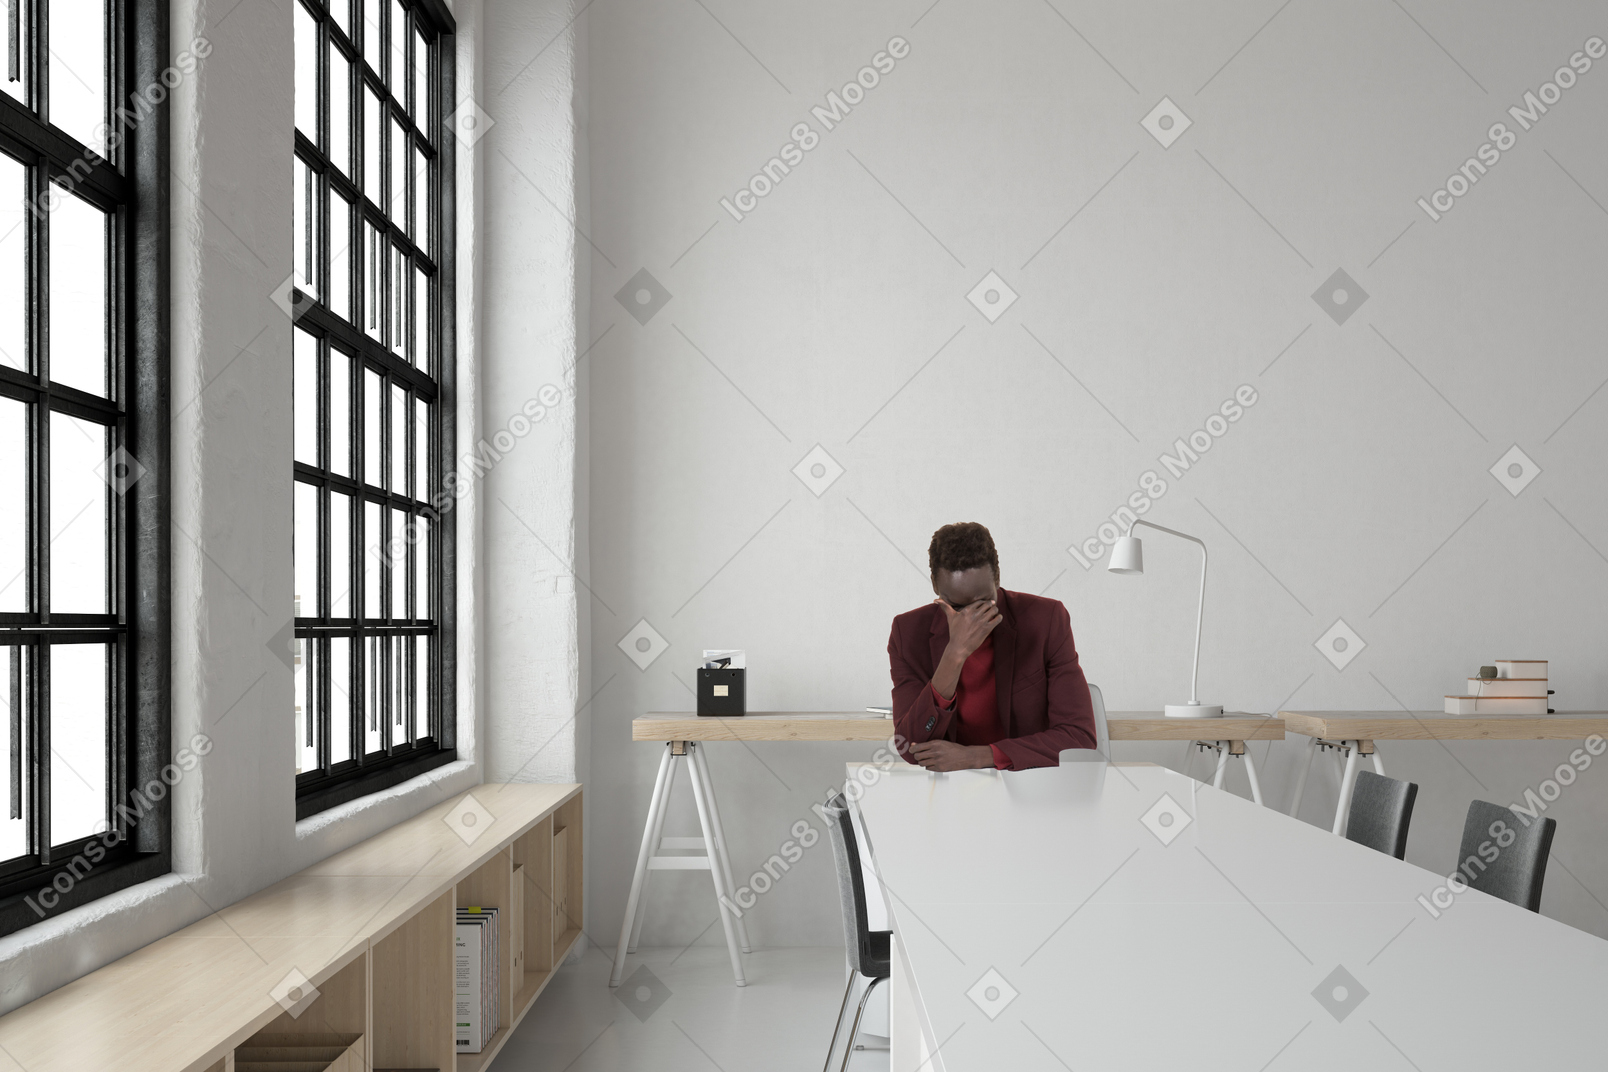 A frustrated man sitting at a table in an office